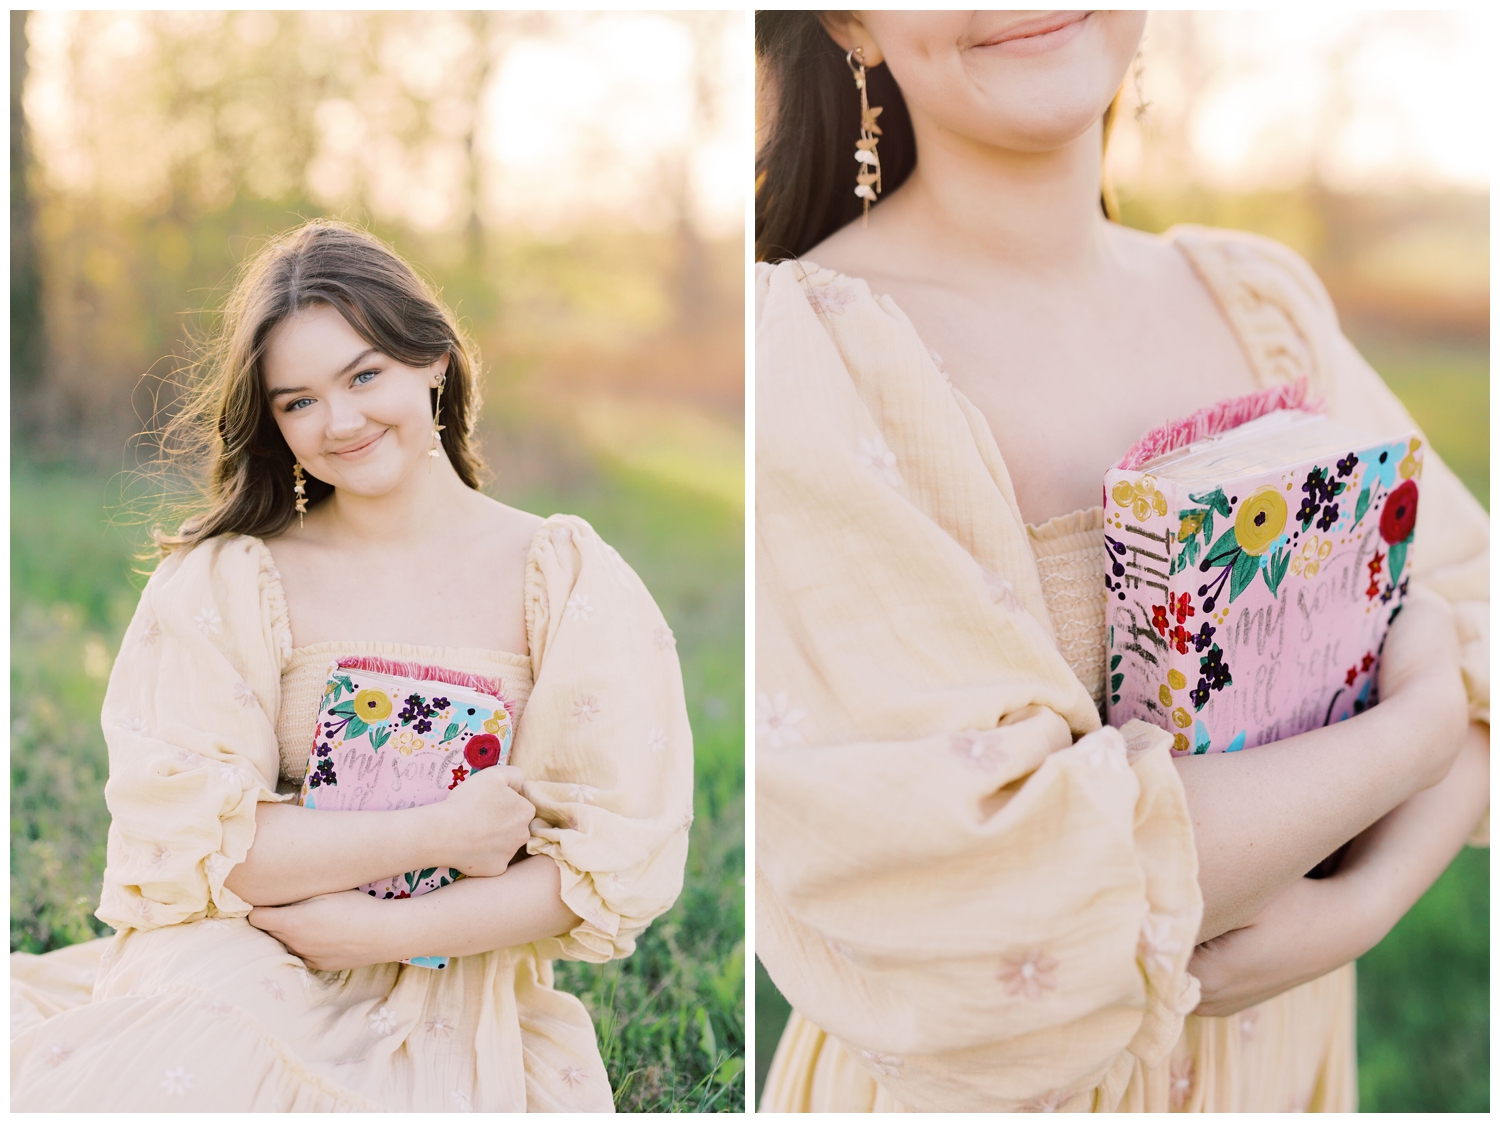 girl in pale yellow flowing dress holding bible outdoors